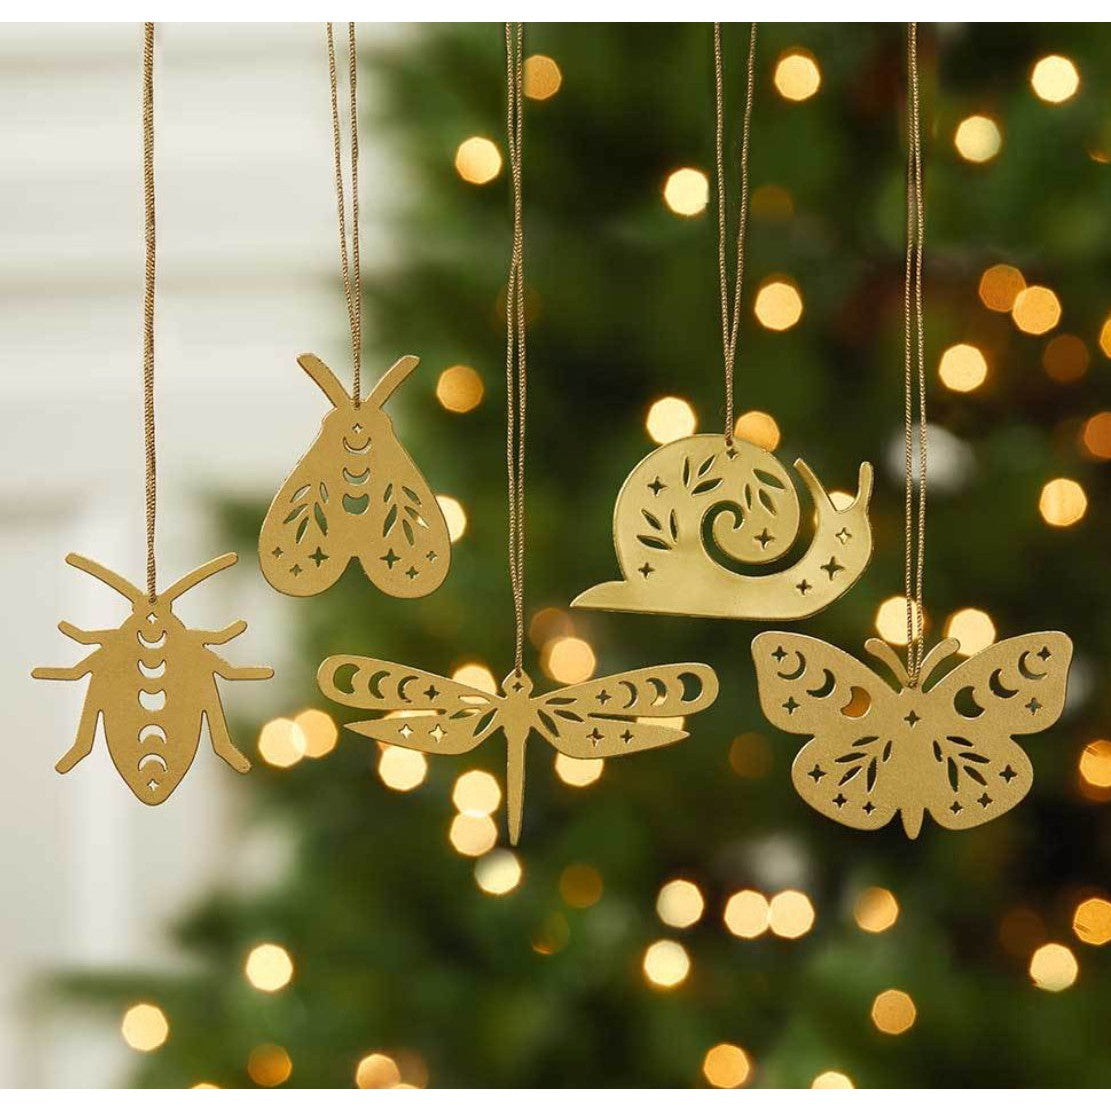 Enchanted Insect Ornament -Sold Individually